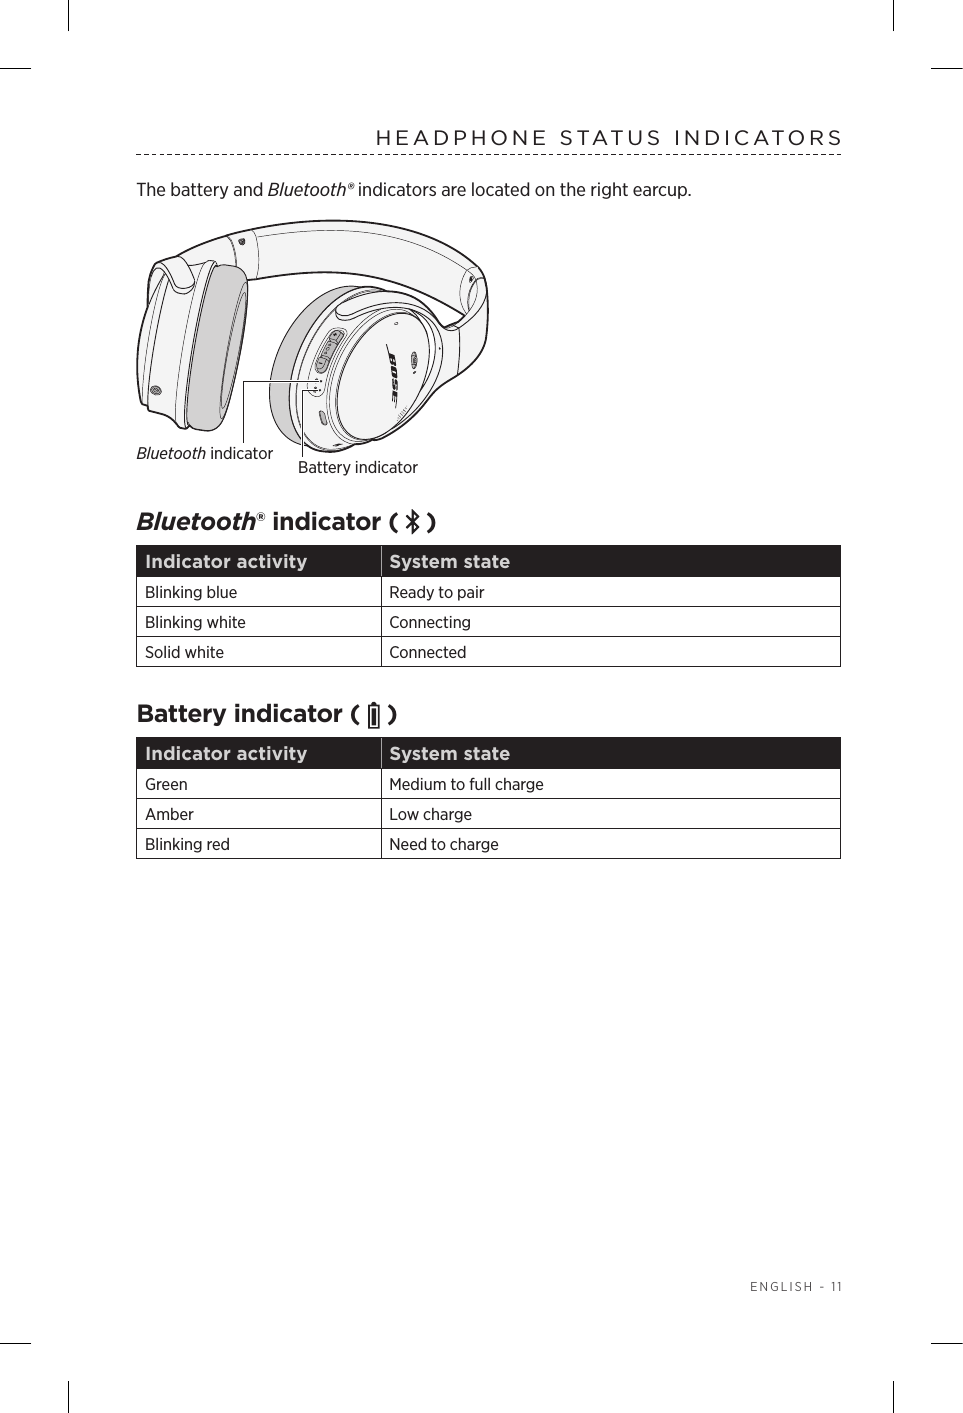  ENGLISH - 11HEADPHONE STATUS INDICATORS The battery and Bluetooth® indicators are located on the right earcup. Bluetooth indicator  Battery  indicatorBluetooth® indicator (   )Indicator activity System stateBlinking blue Ready to pairBlinking white ConnectingSolid white ConnectedBattery indicator (   )Indicator activity System stateGreen Medium to full chargeAmber Low chargeBlinking red Need to charge